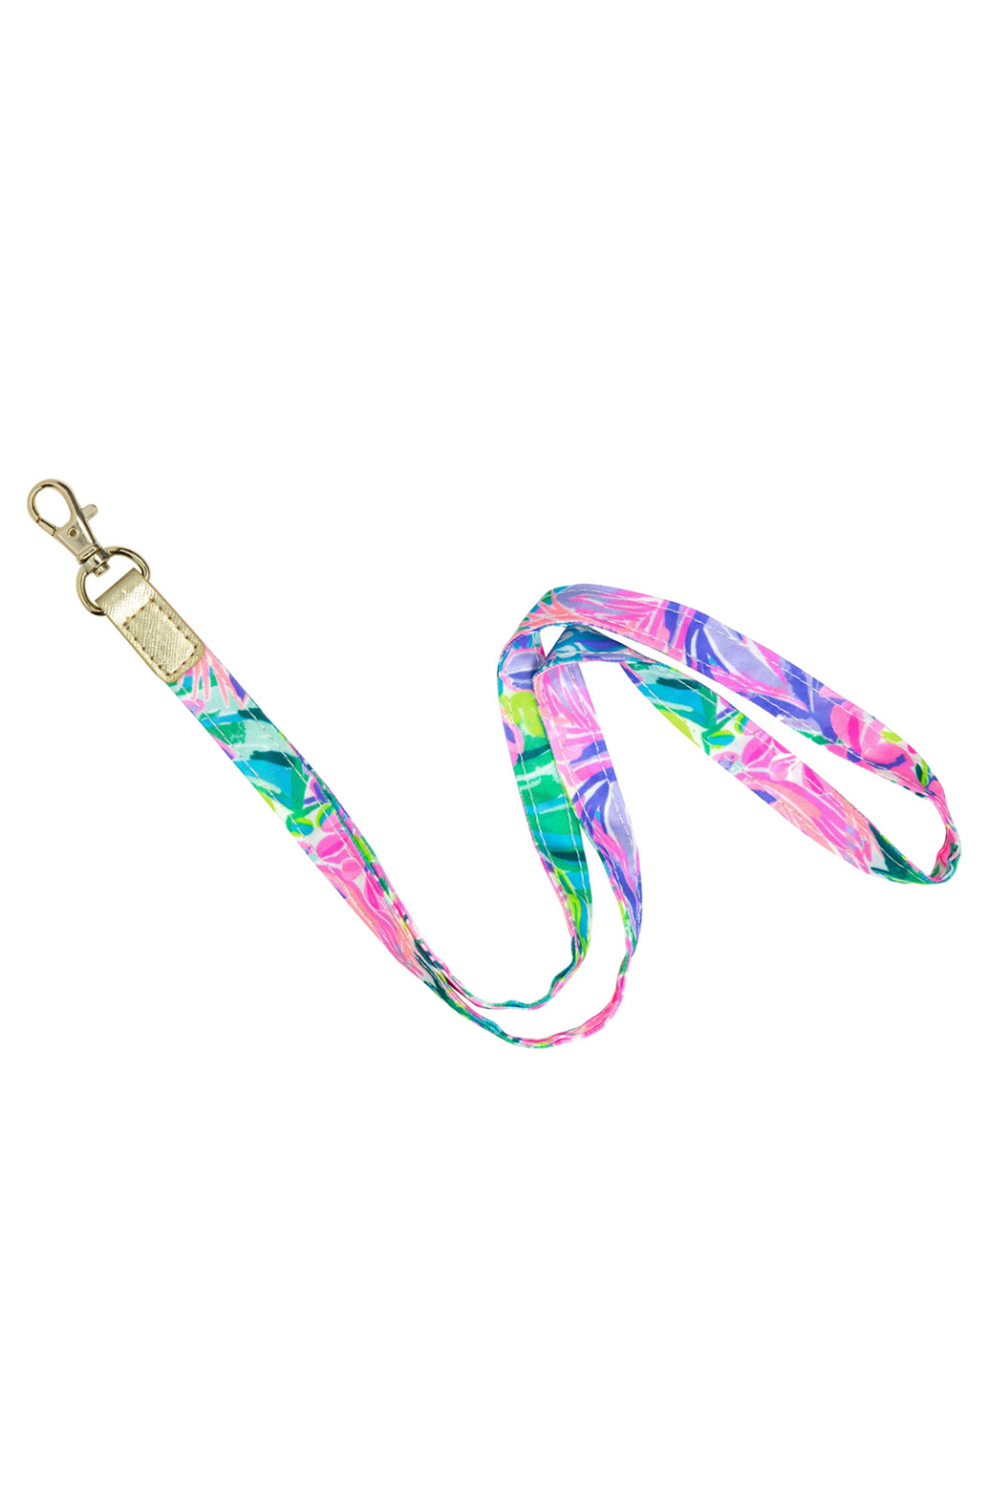 Lilly Lanyard - All in a Dream